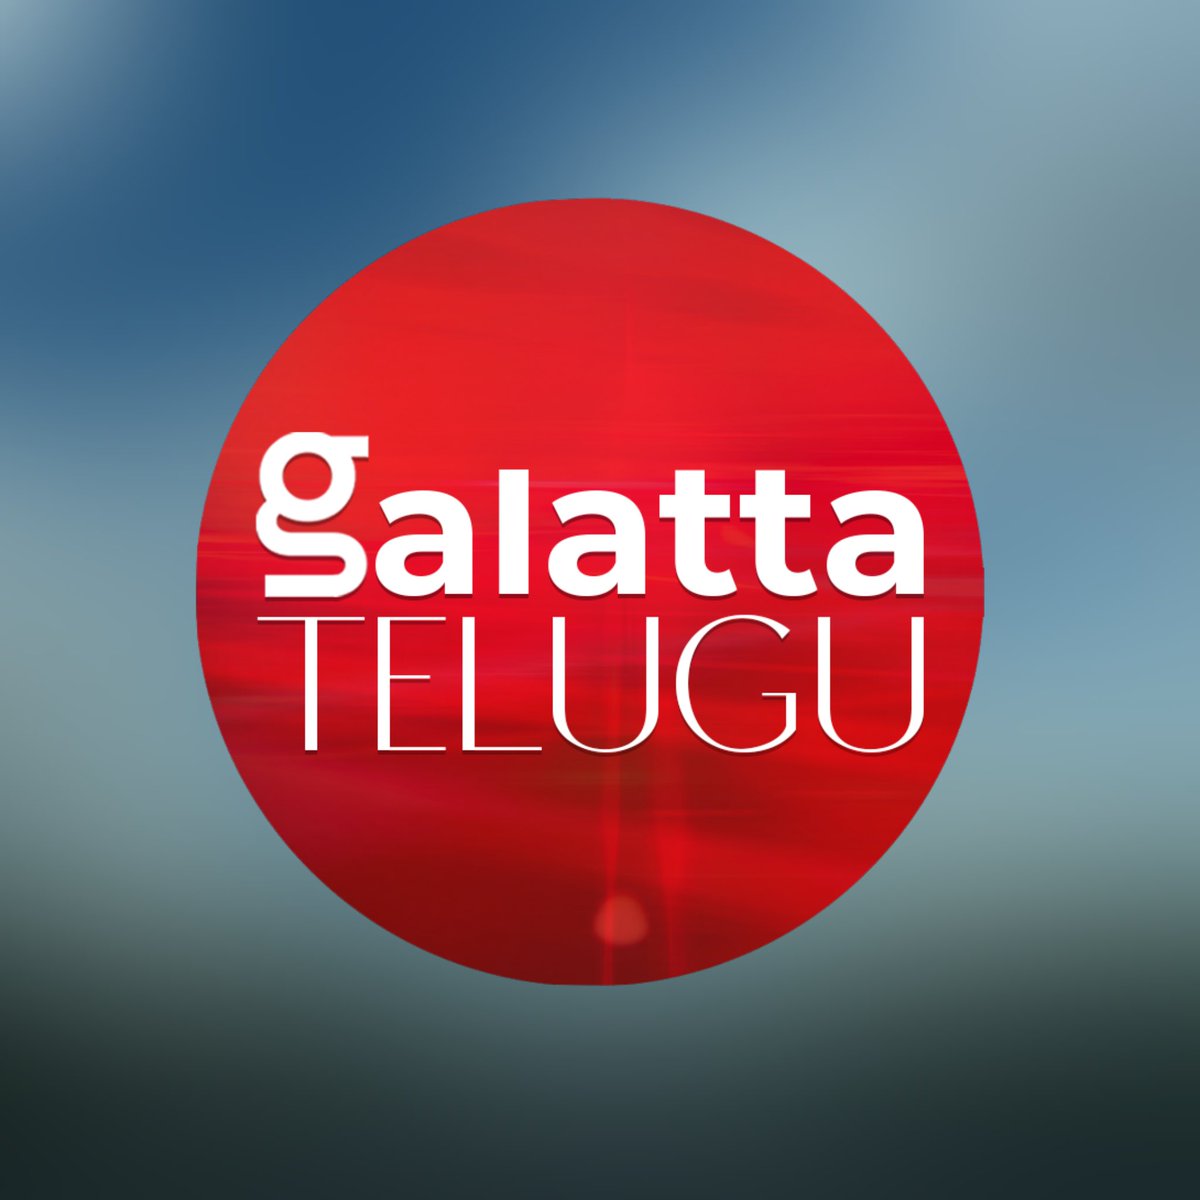 CAREER UPDATE: Starting today, I’ll be building GALATTA TELUGU, a quality, honest space for conversations, reviews, live events and all things Telugu cinema. Need your support more than ever. Let’s do it 🌟 Subscribe: youtu.be/AodQKtcr00Q?fe…